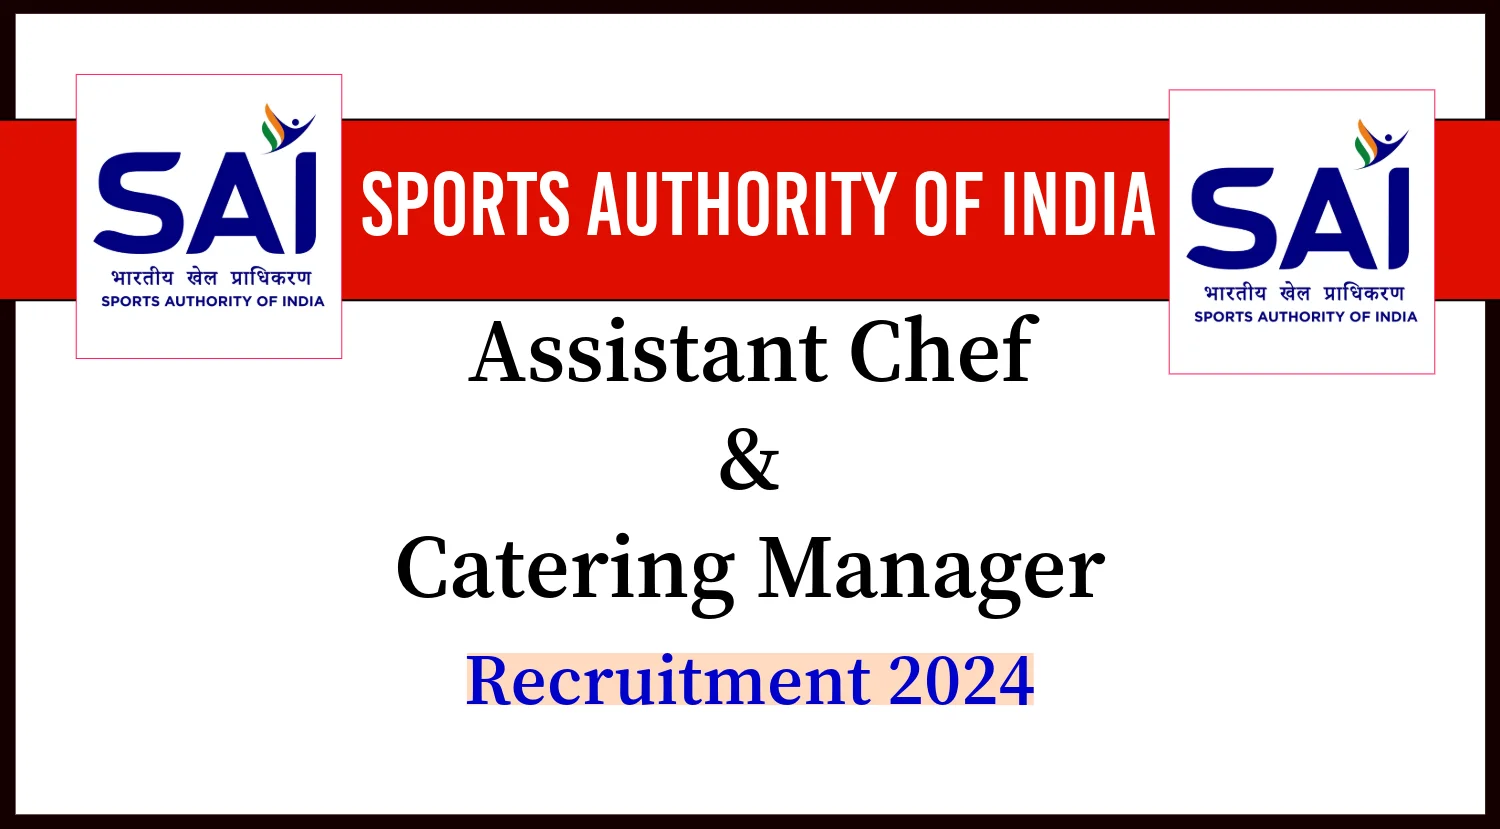 SAI Assistant Chef and Catering Manager Recruitment 2024